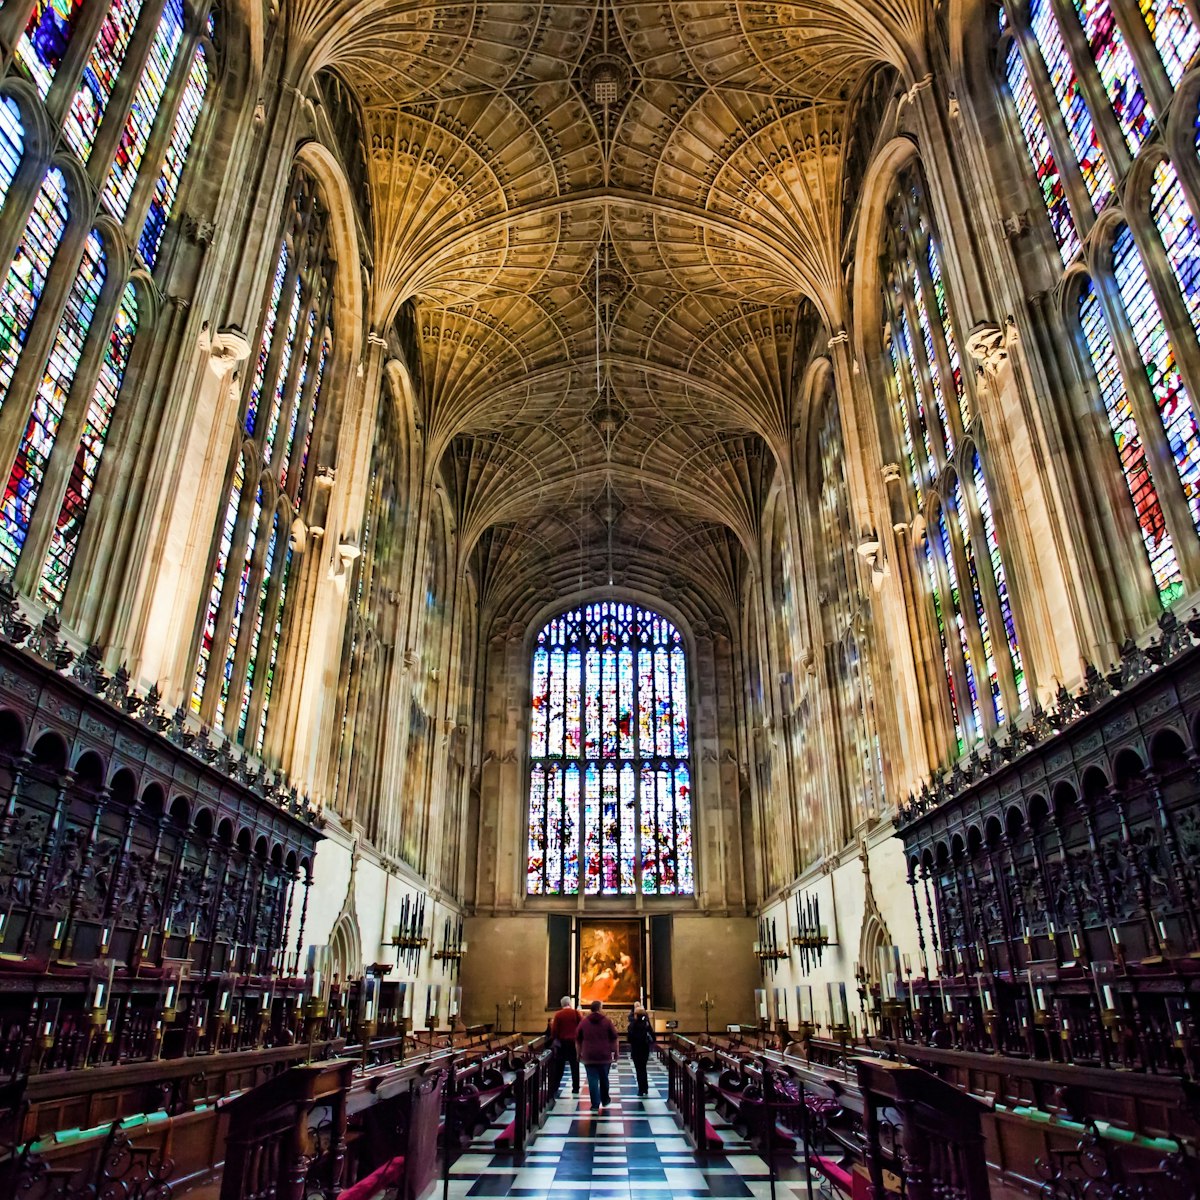 View inside Kings college Chapel Cambridge, showing the fan vault ceiling and vast wooden paneling, and amazing stain glass windows.